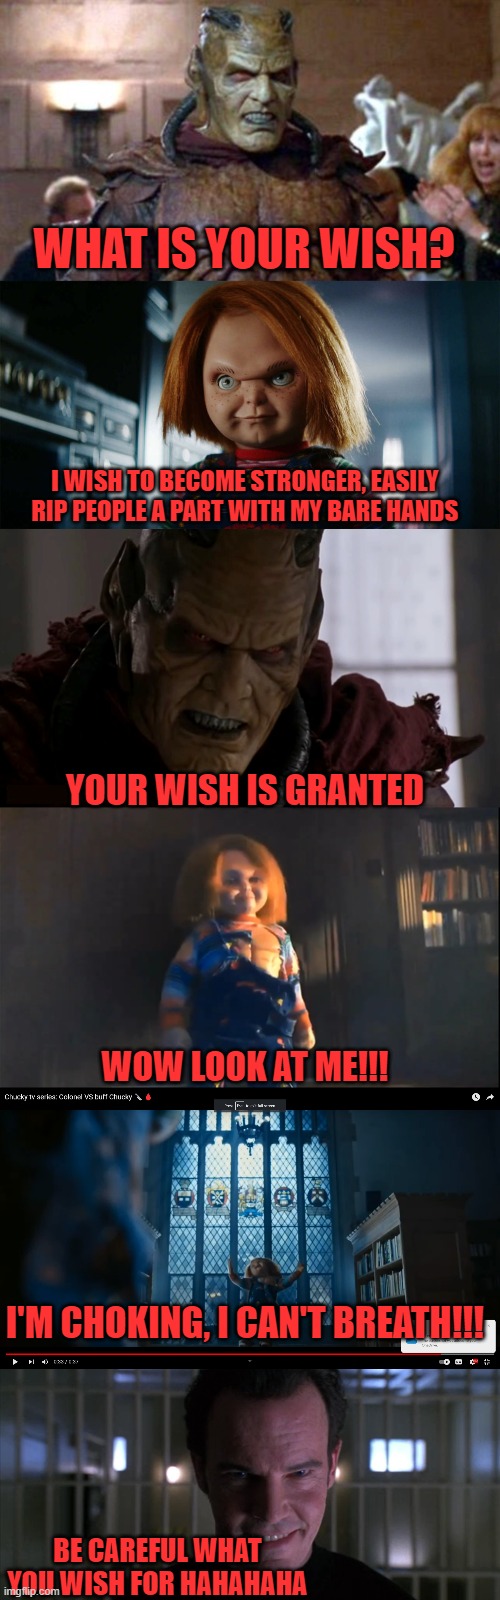  WHAT IS YOUR WISH? I WISH TO BECOME STRONGER, EASILY RIP PEOPLE A PART WITH MY BARE HANDS; YOUR WISH IS GRANTED; WOW LOOK AT ME!!! I'M CHOKING, I CAN'T BREATH!!! BE CAREFUL WHAT YOU WISH FOR HAHAHAHA | image tagged in chucky,wishmaster,don't wish to become stronger it kills you,worst than steroids kids | made w/ Imgflip meme maker